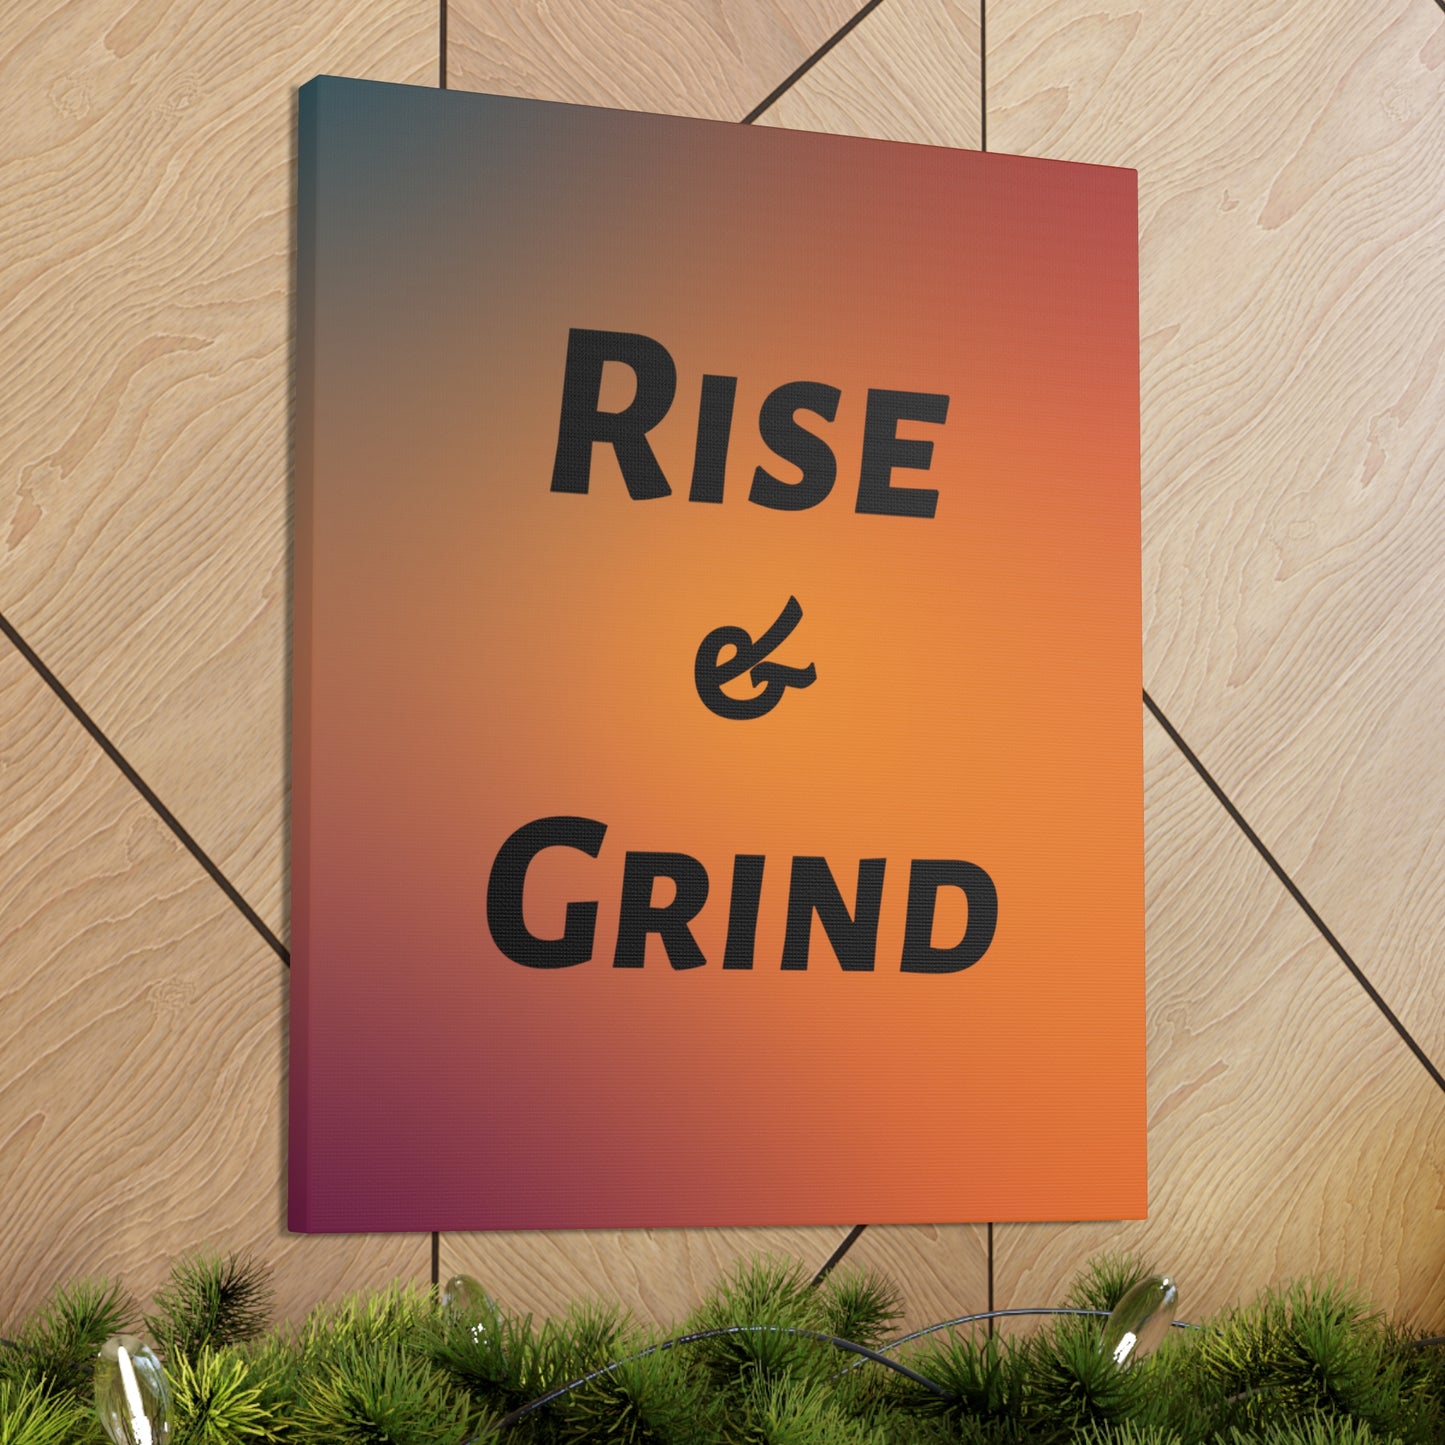 Office wall art with rise and grind motivational message